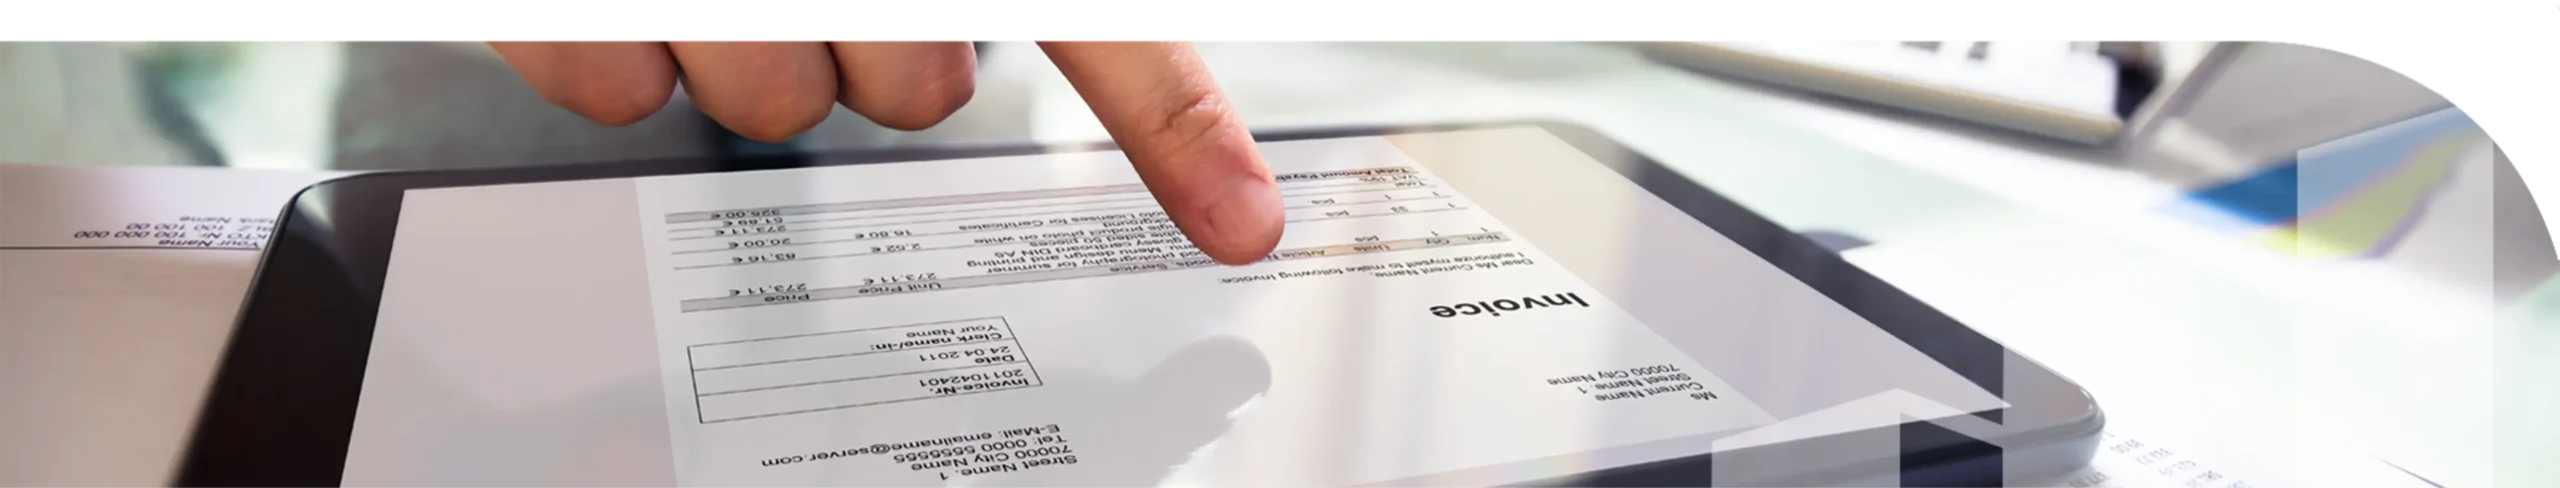 A picture of a man pointing at an invoice